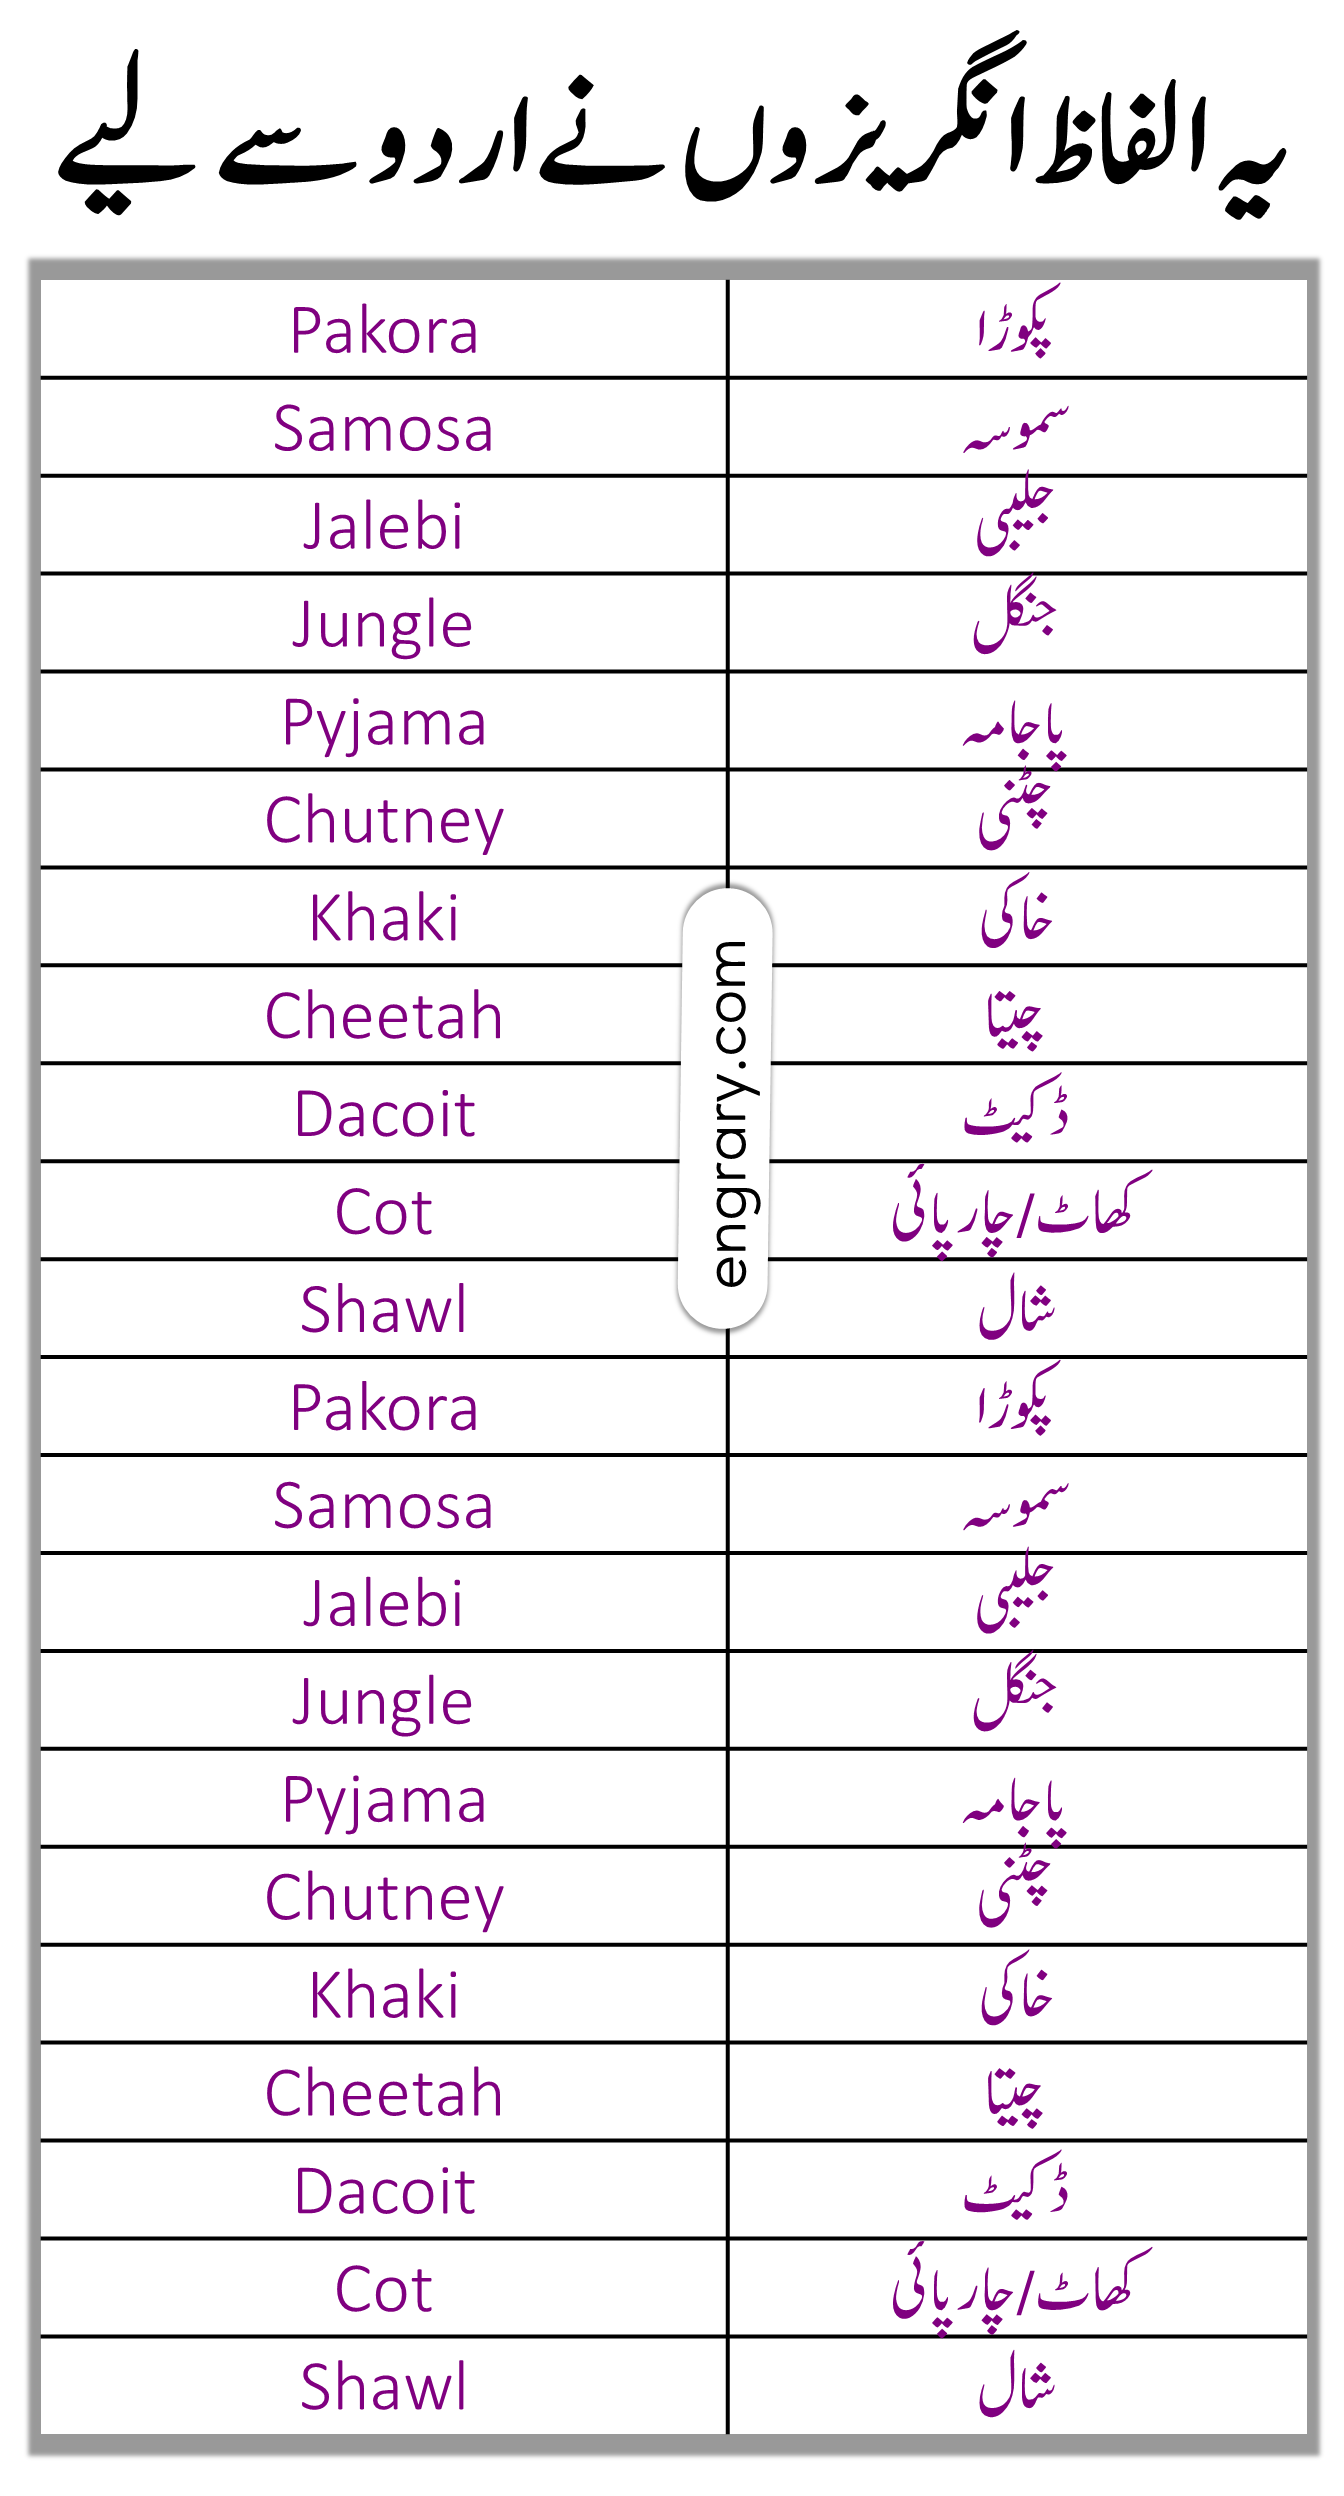 List Of Words That Are Same In Urdu And English 